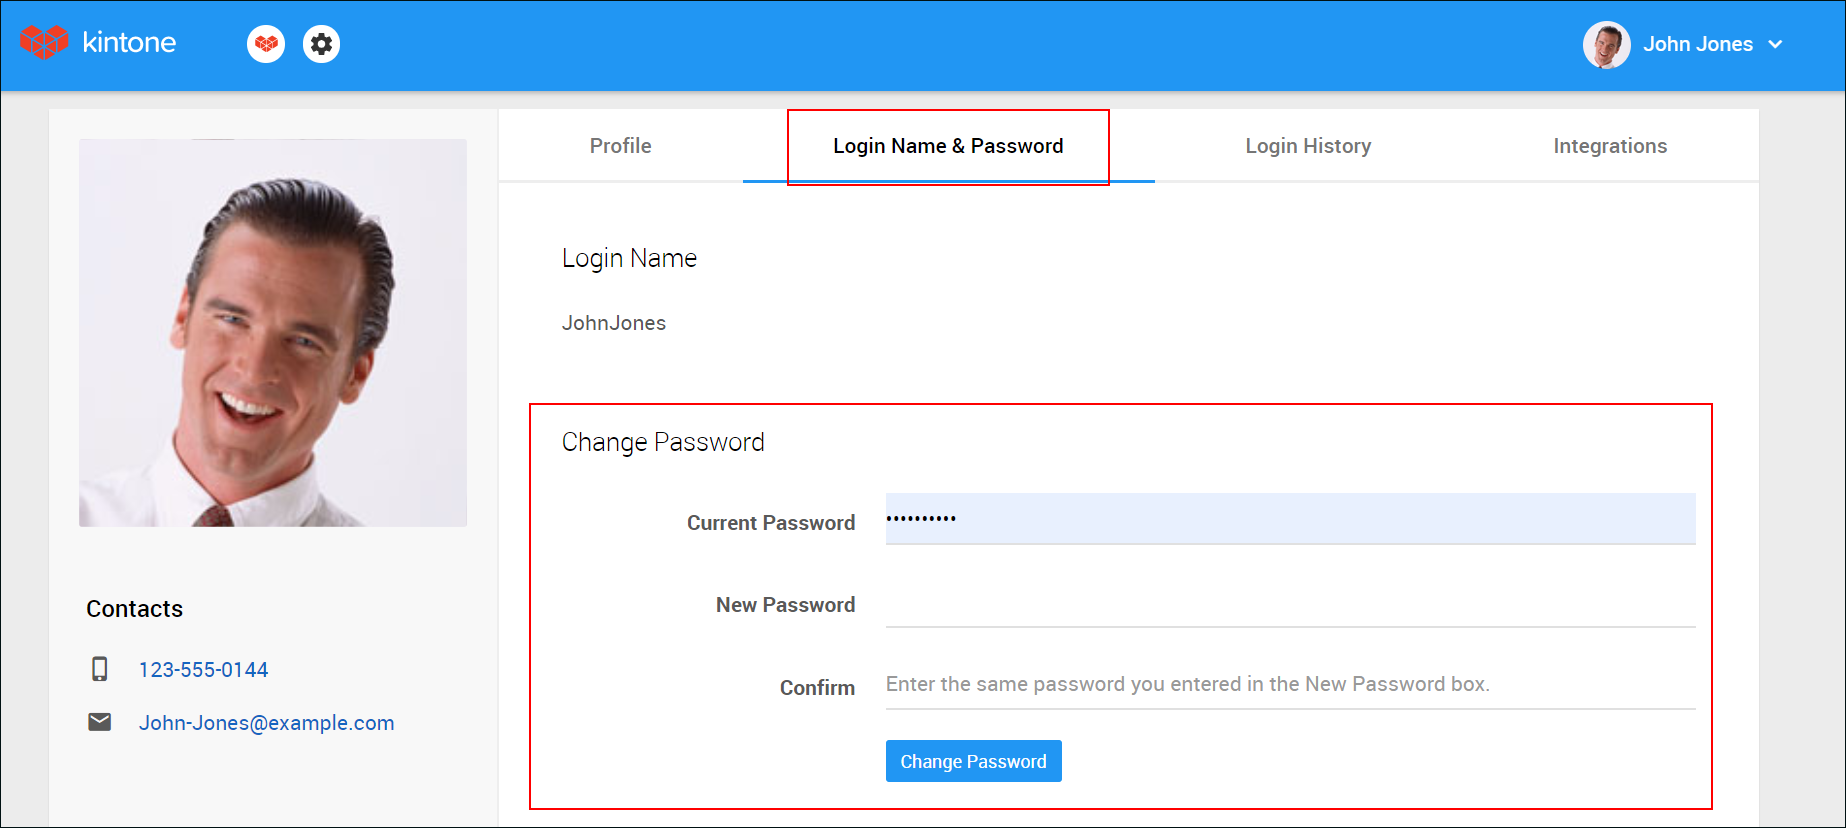 Screenshot: The fields to enter current and new passwords are displayed